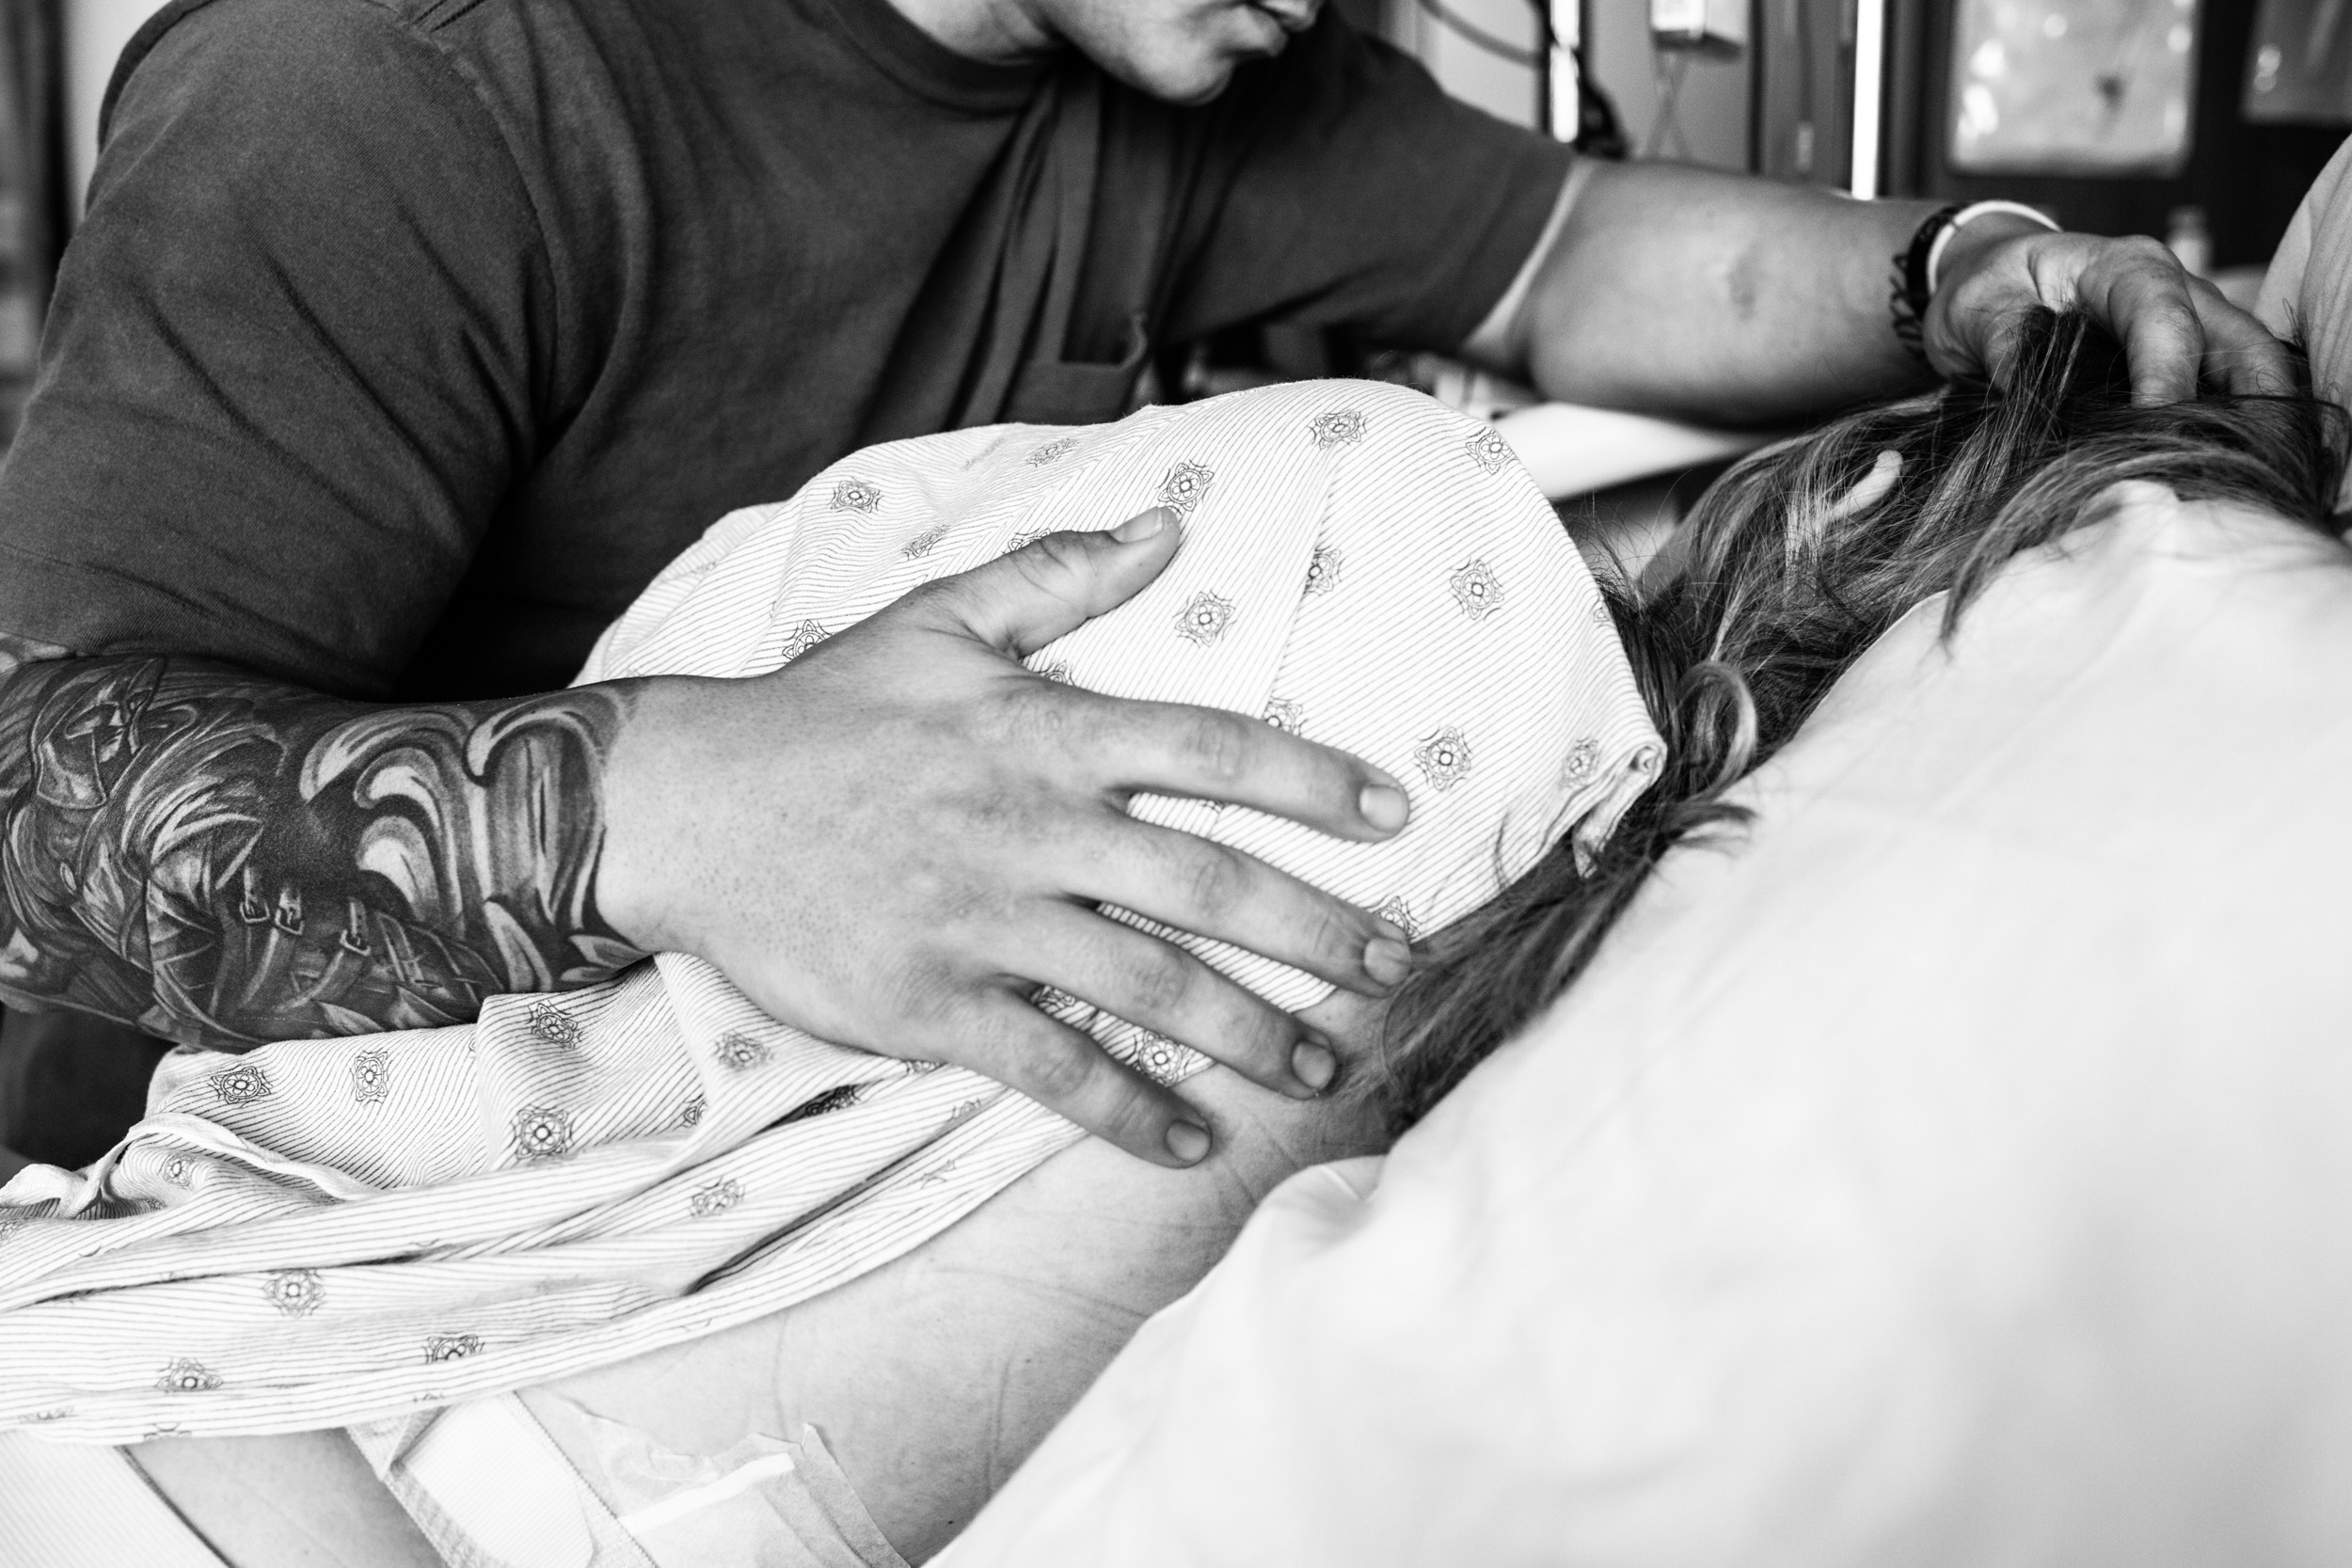 soon-to-be father placing hand on laboring wife's back